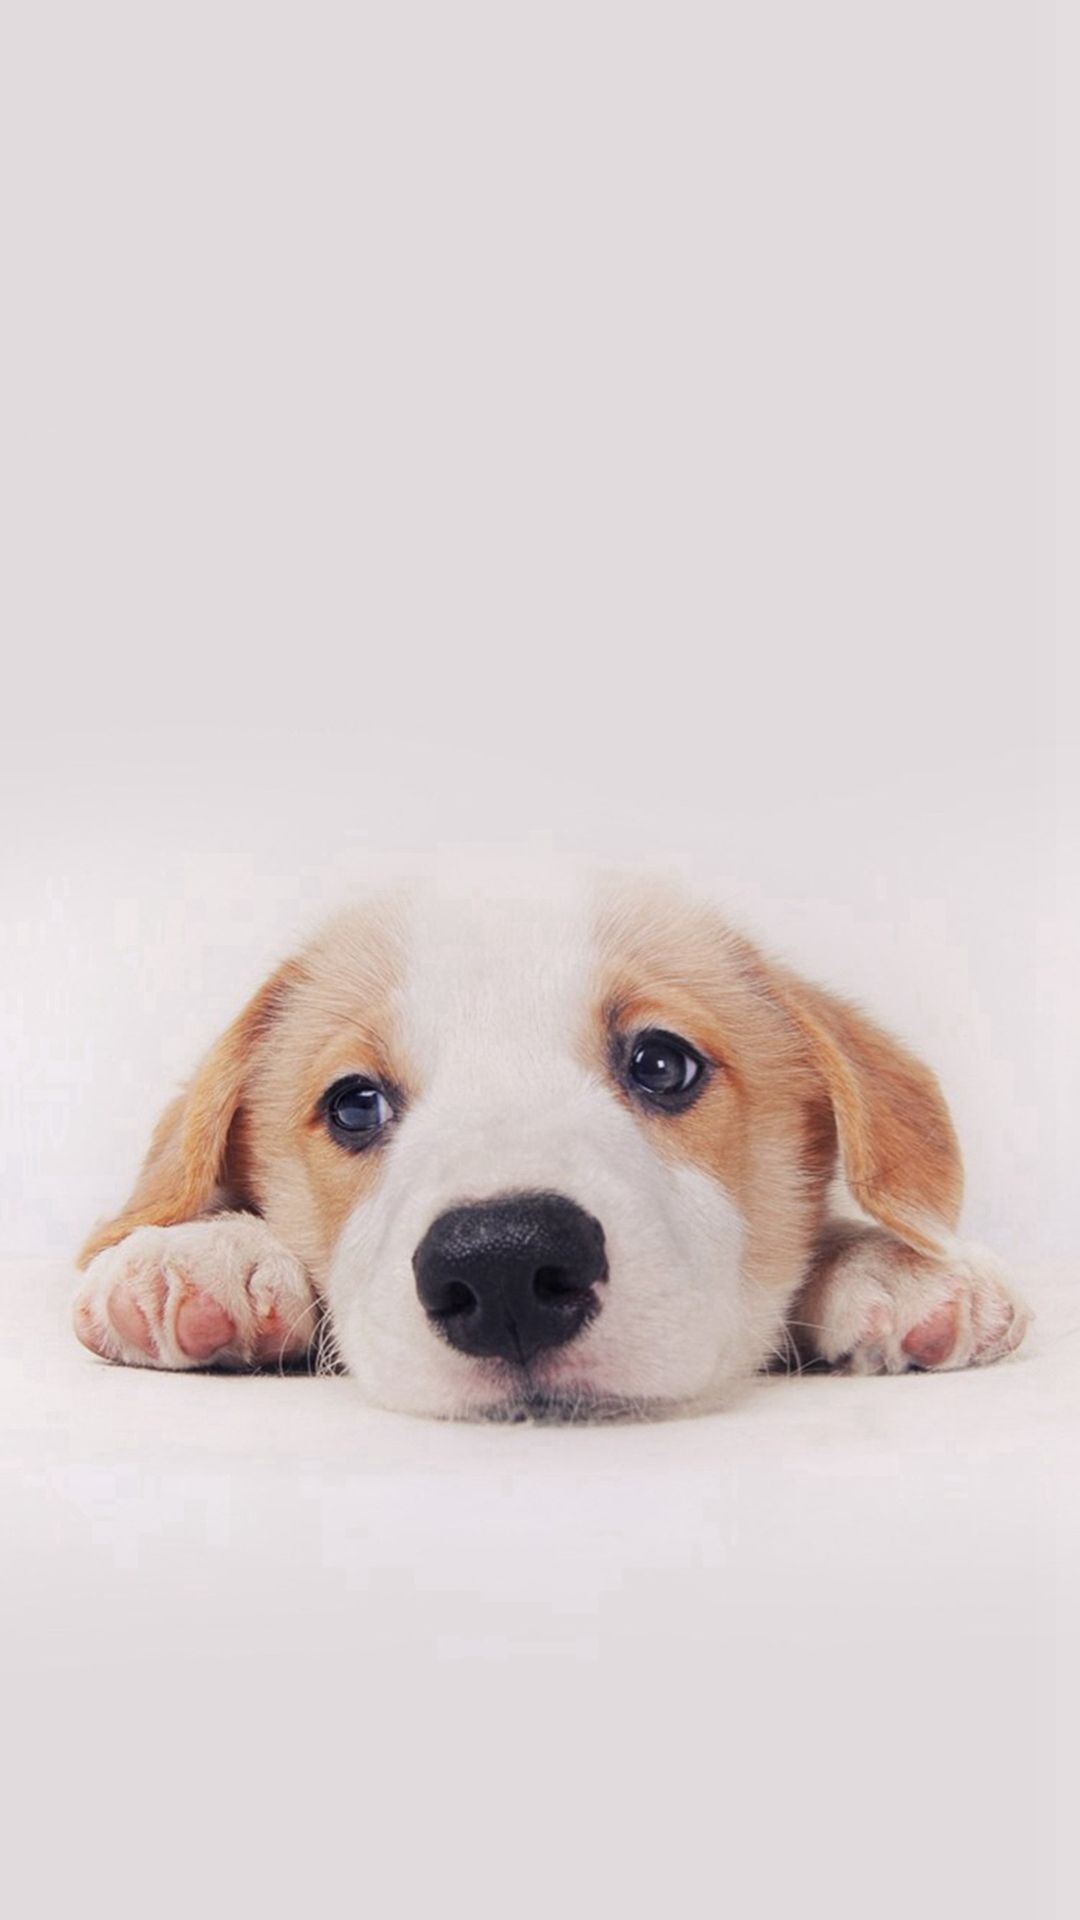 Cute Puppy Dog Pet #iPhone #6 #plus #wallpaper | iPhone 6 Wallpapers ...